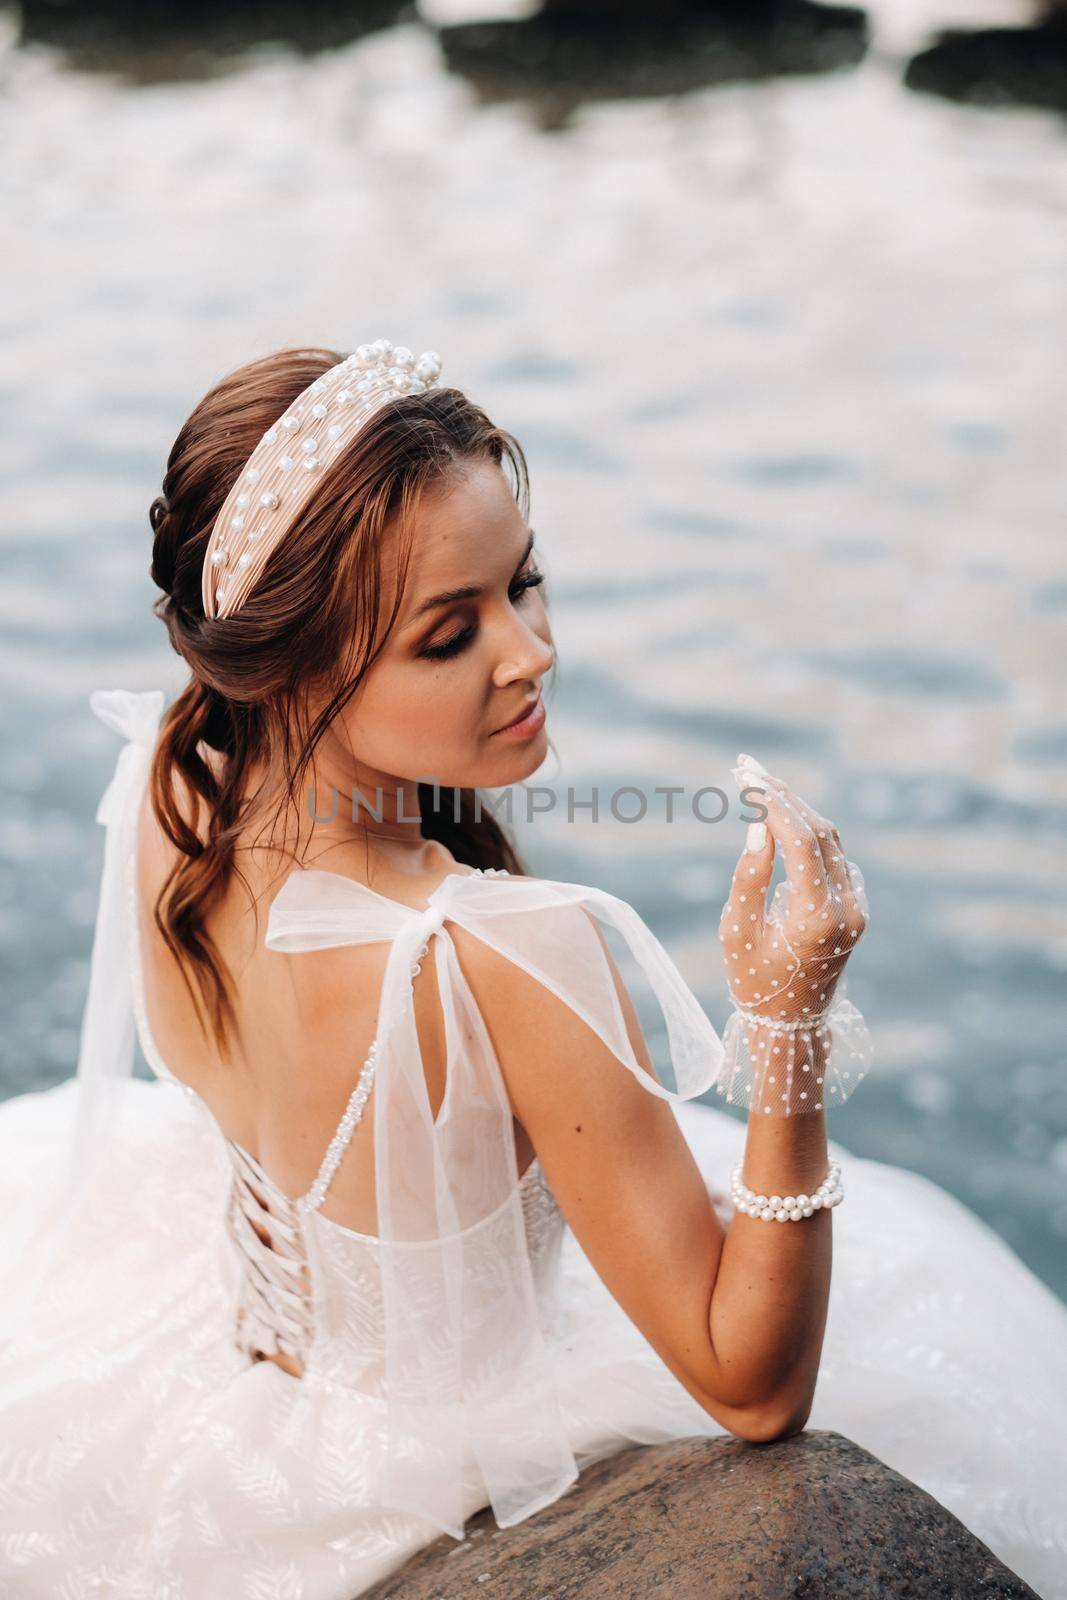 An elegant bride in a white dress and gloves is sitting by the lake in the Park, enjoying nature.A model in a wedding dress and gloves in a nature Park.Belarus